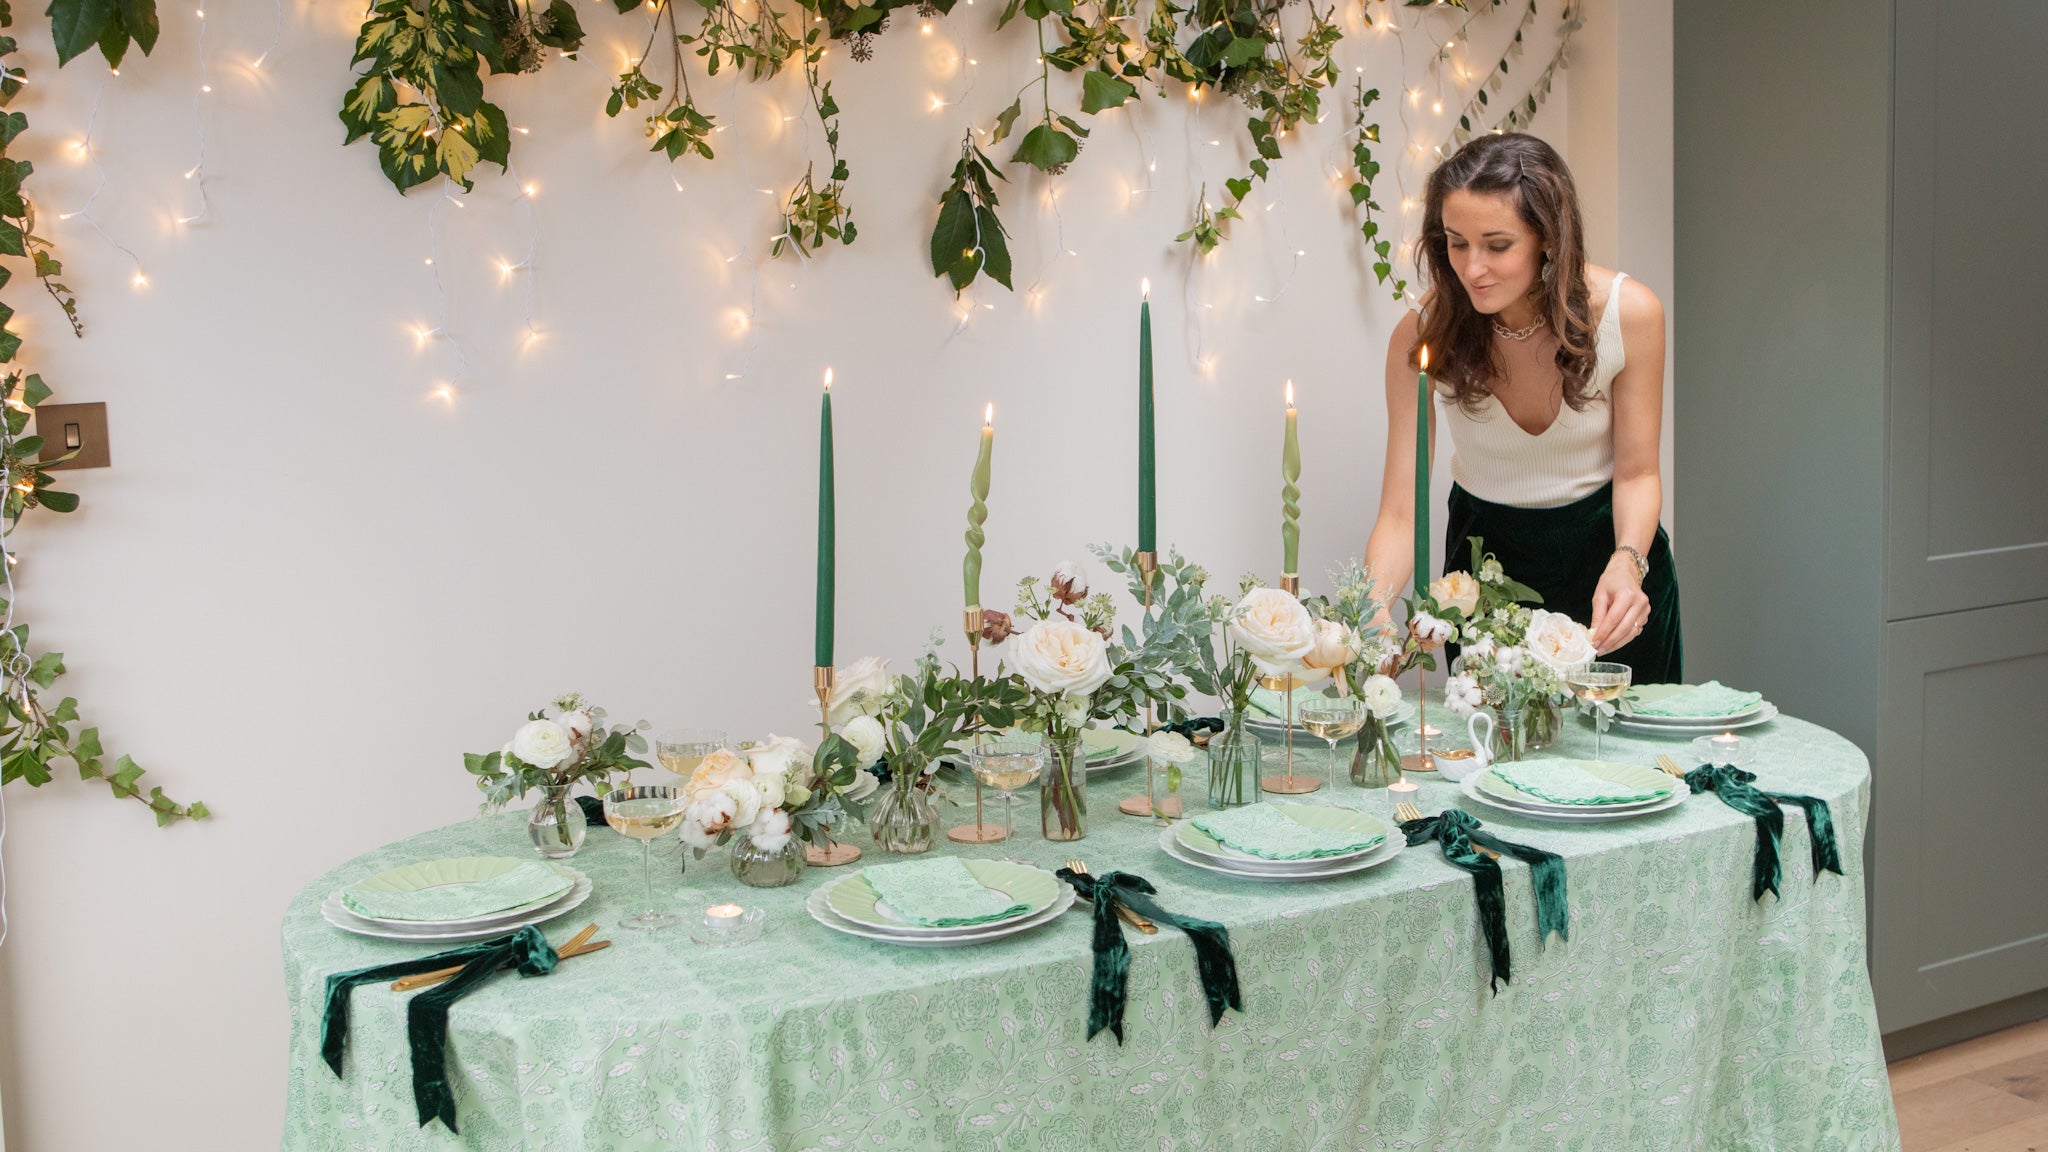 Rosanna Falconer arranges festive tablescape with rose block printed green tablecloth